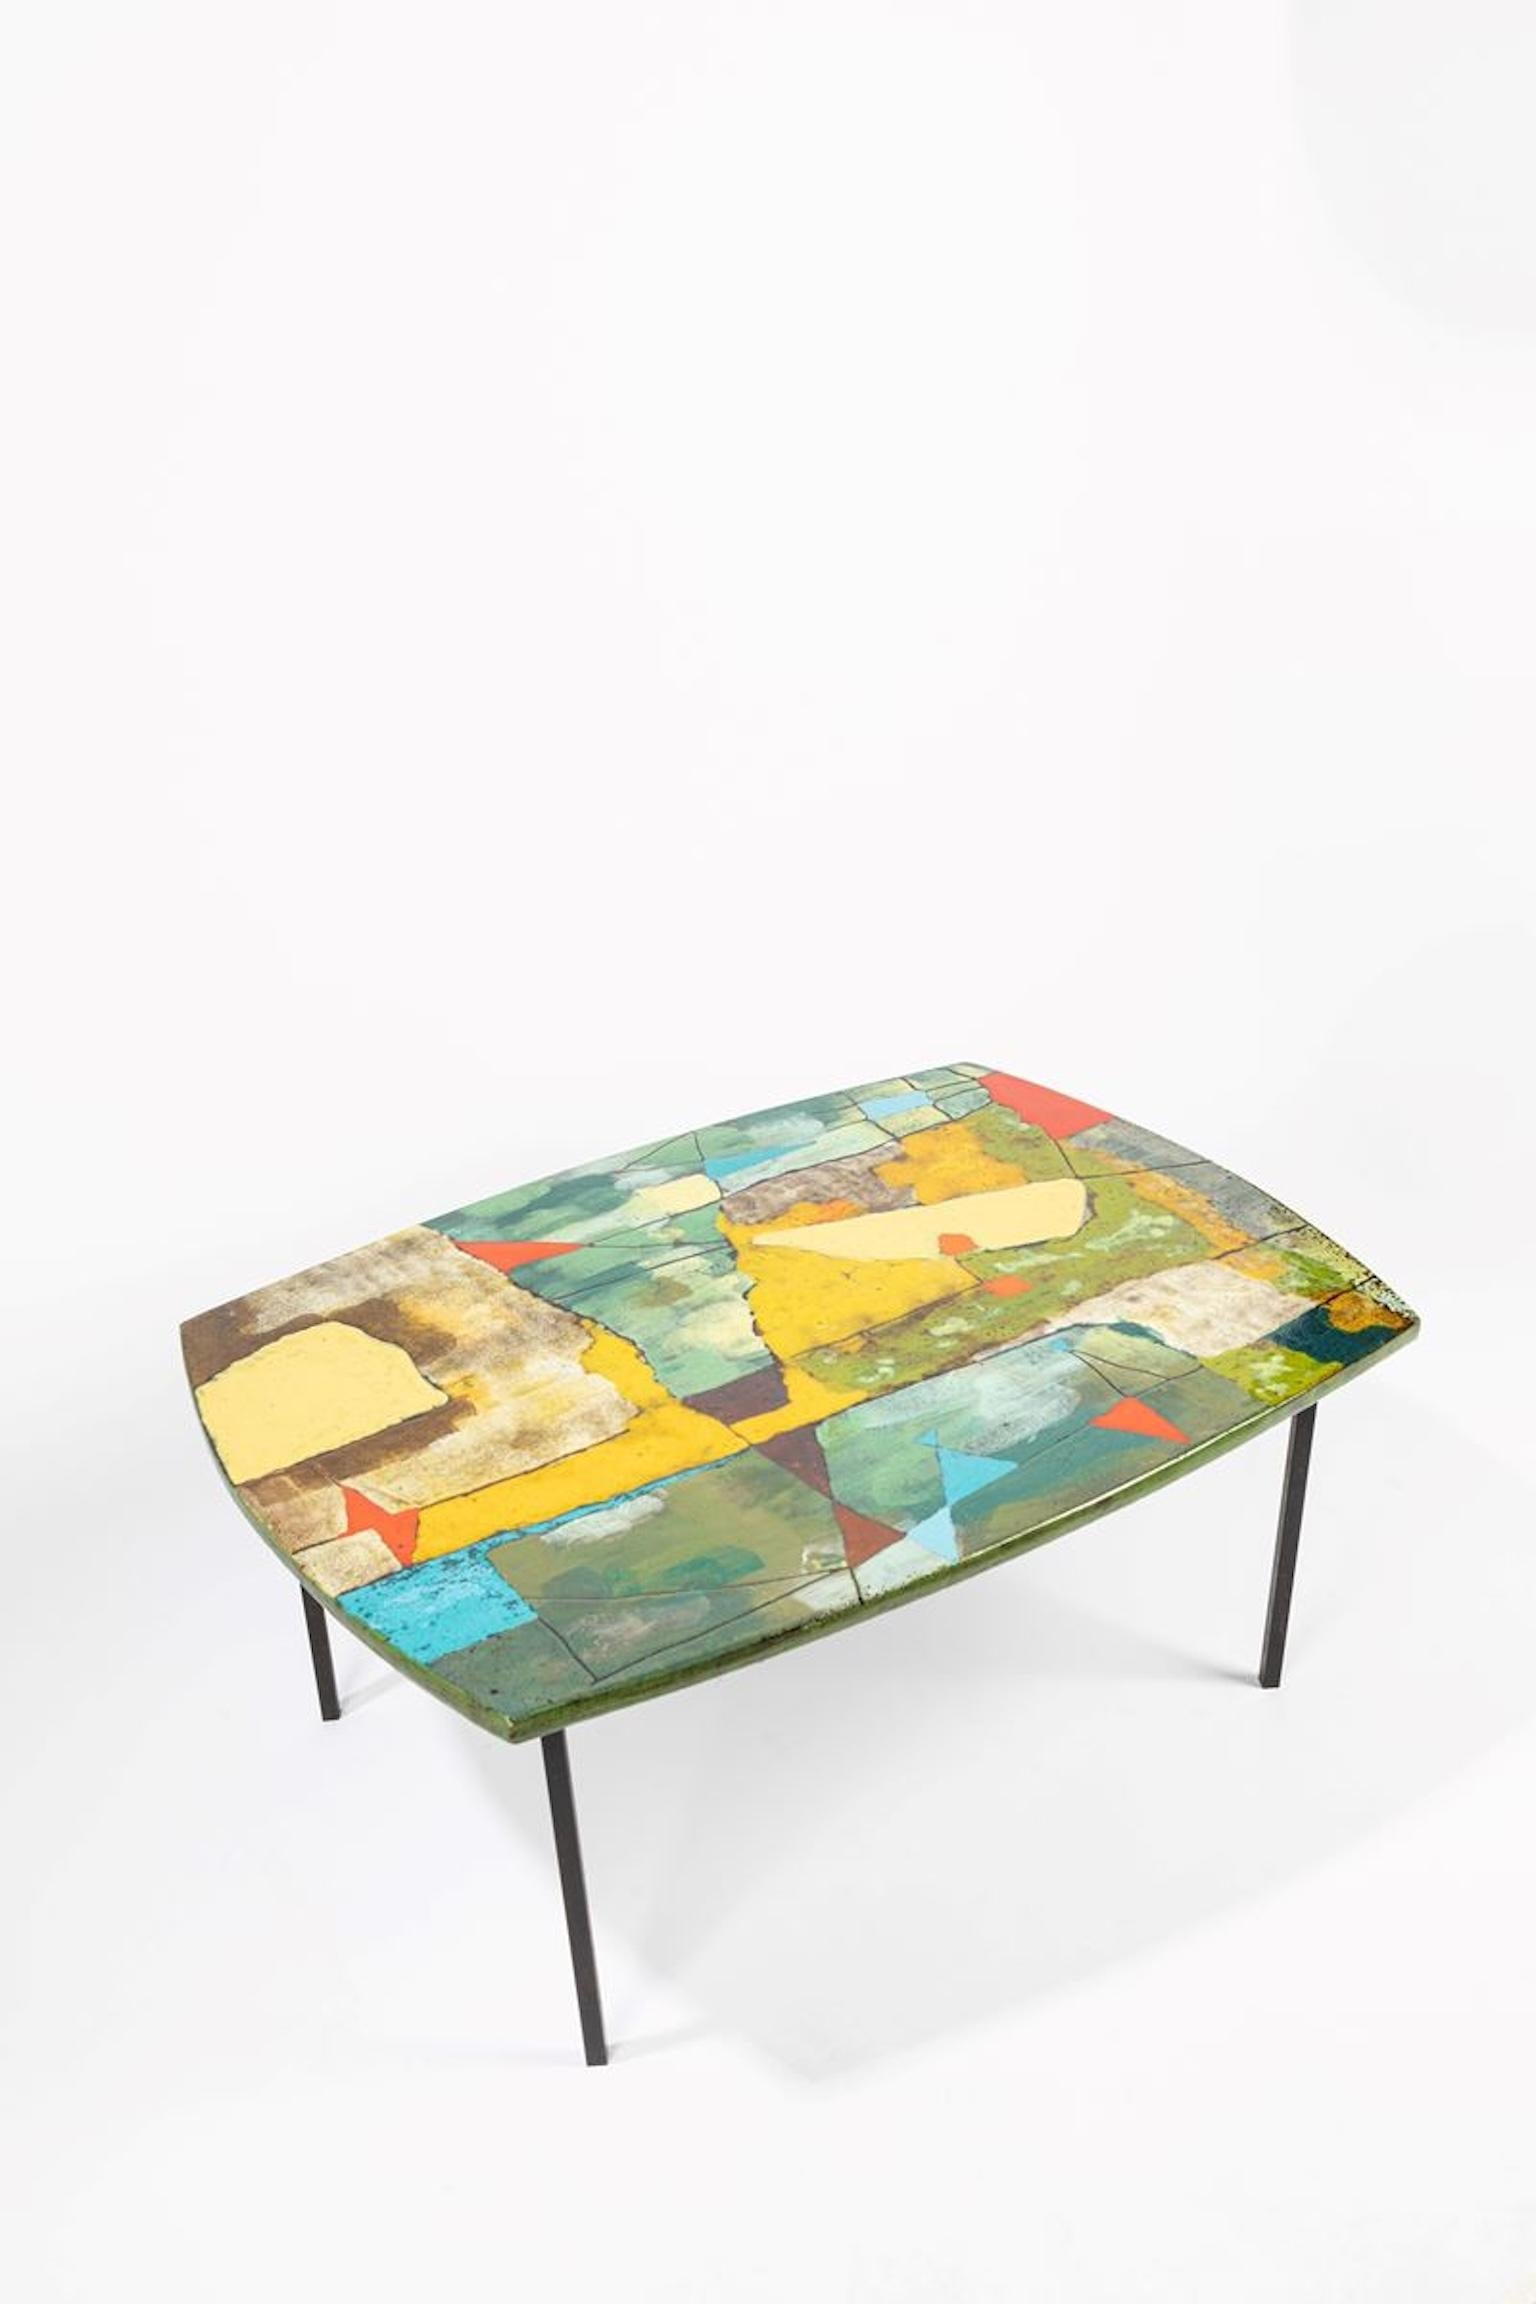 Coffee table with iron structure and glazed ceramic top by Victor Cerrato, 1950. Unique piece.

Biography
The sculptor and ceramist Victor (Vittorio) Cerrato, born in Cunico d'Asti in 1917, opened a ceramic workshop in some rooms in the Valentino